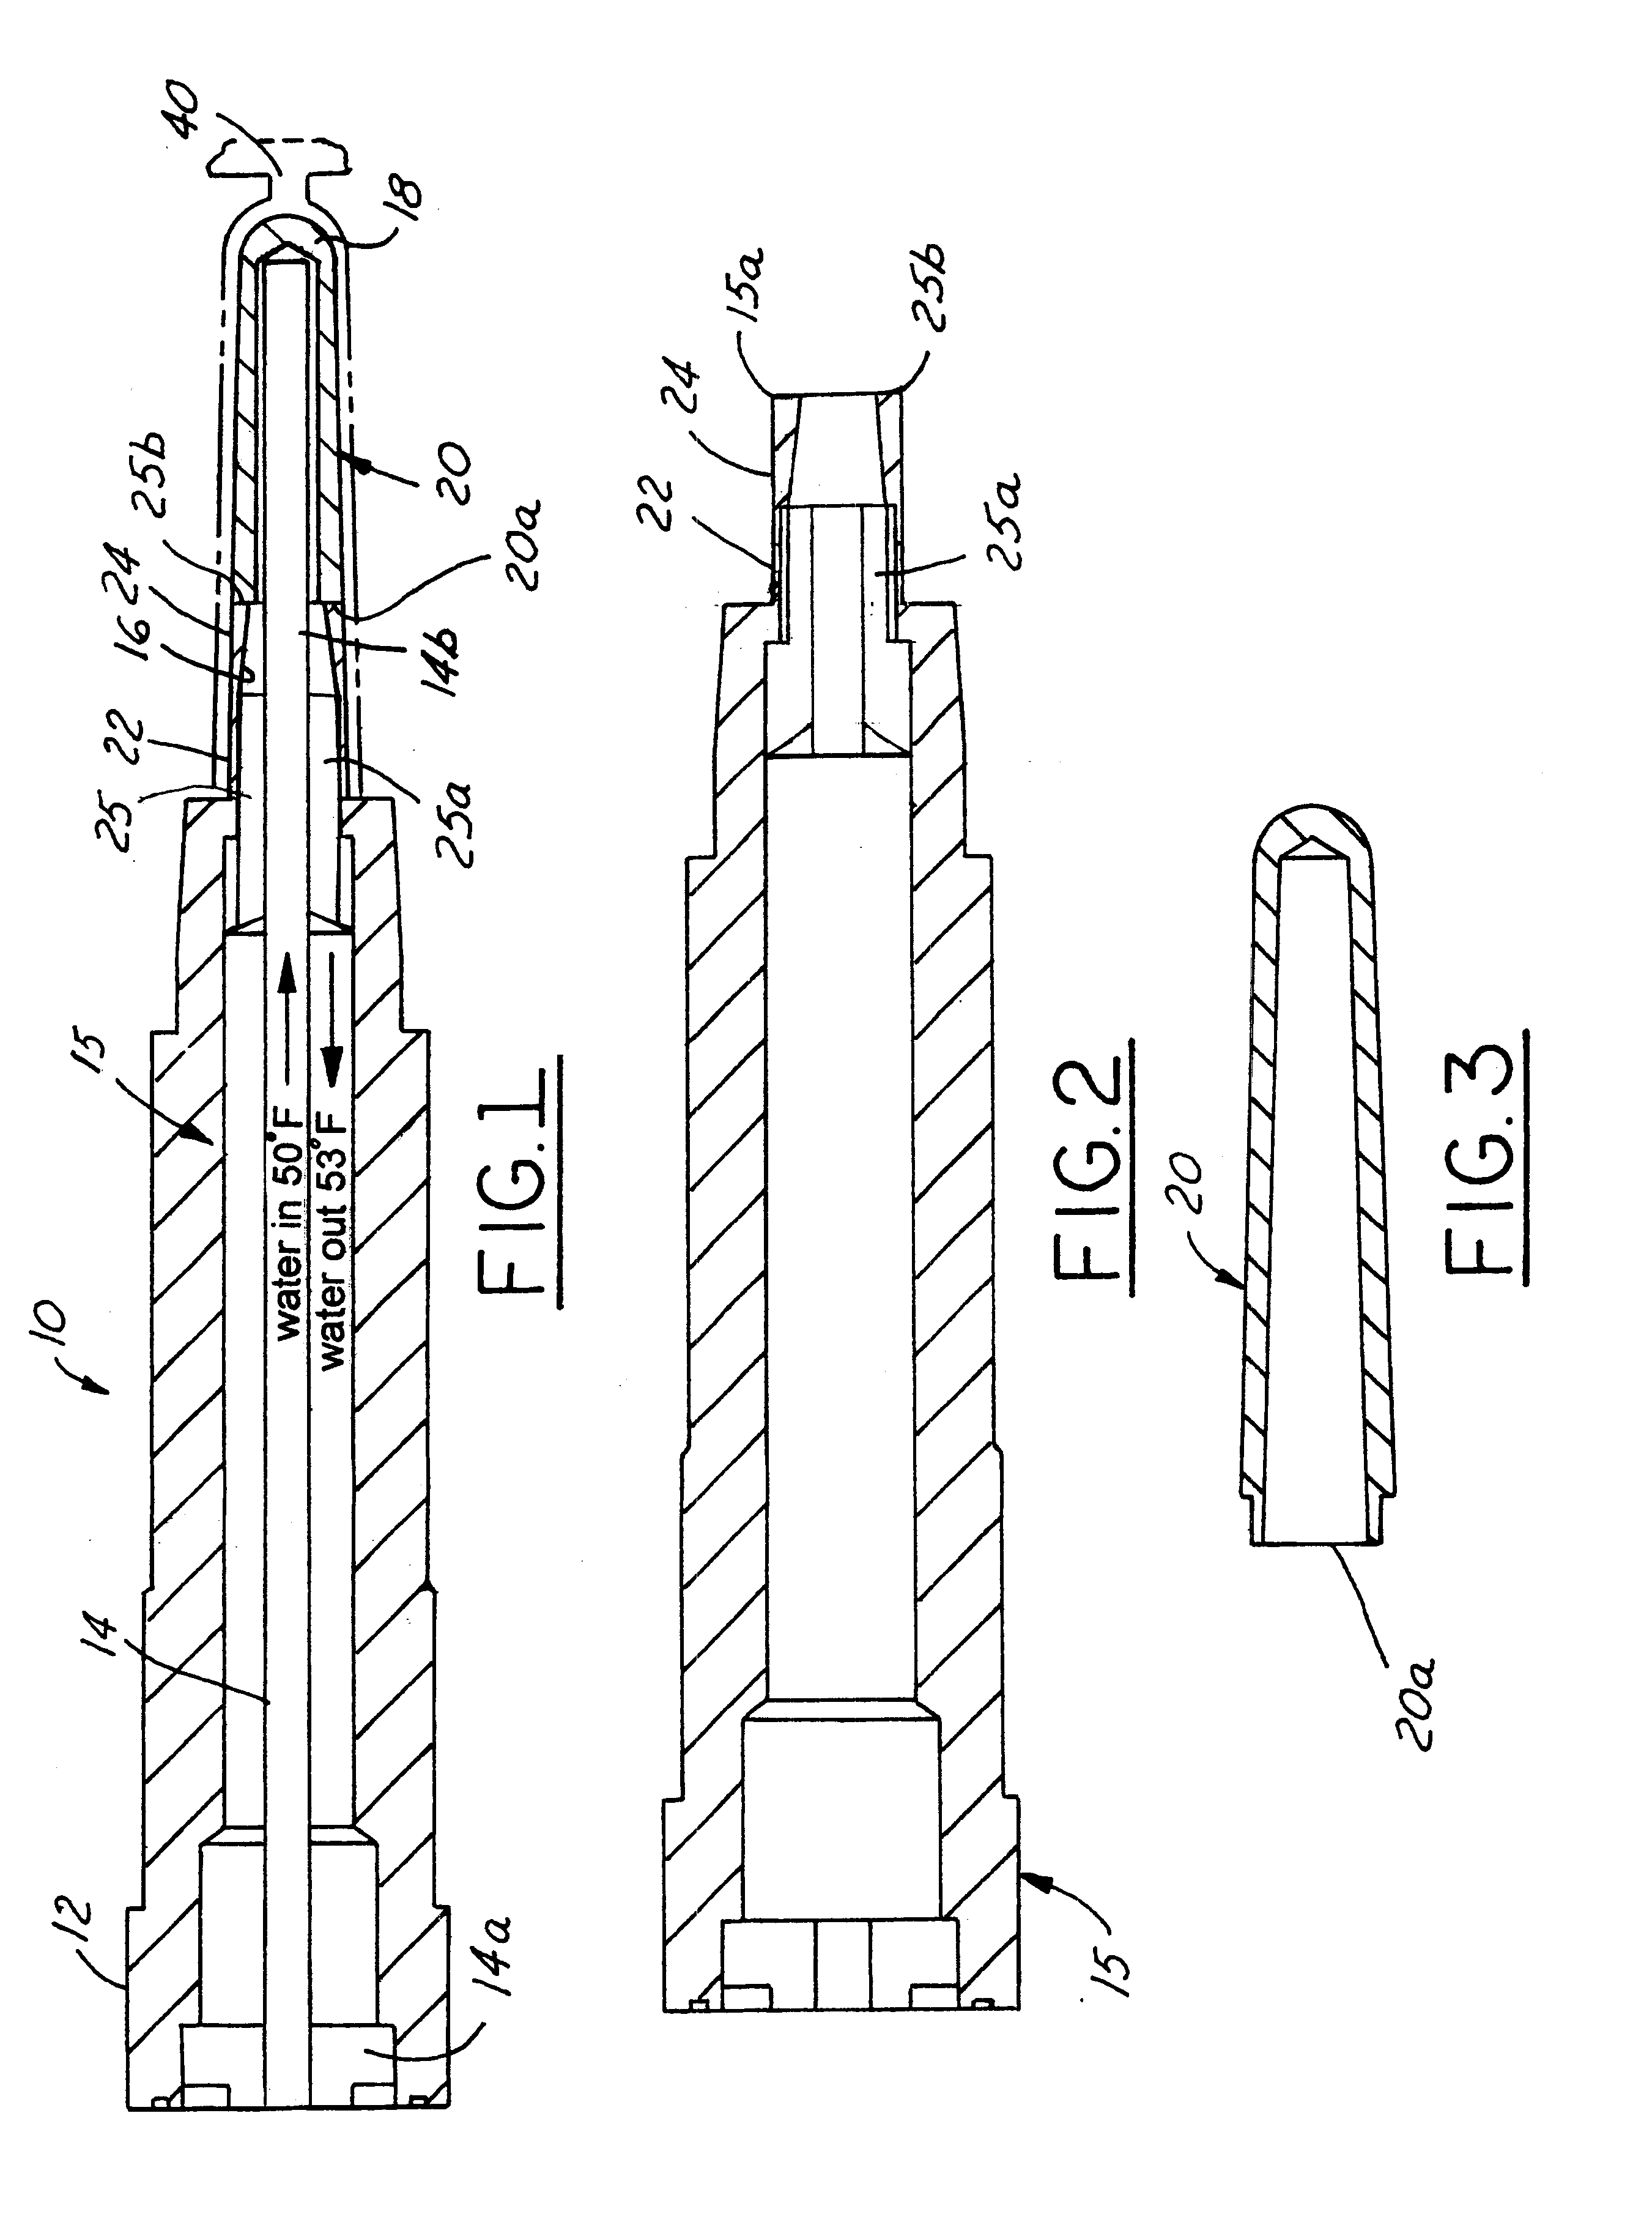 Bubbler tube with integral inlet pipe and bimetal core for injection molding tools and method of making the bubbler tube